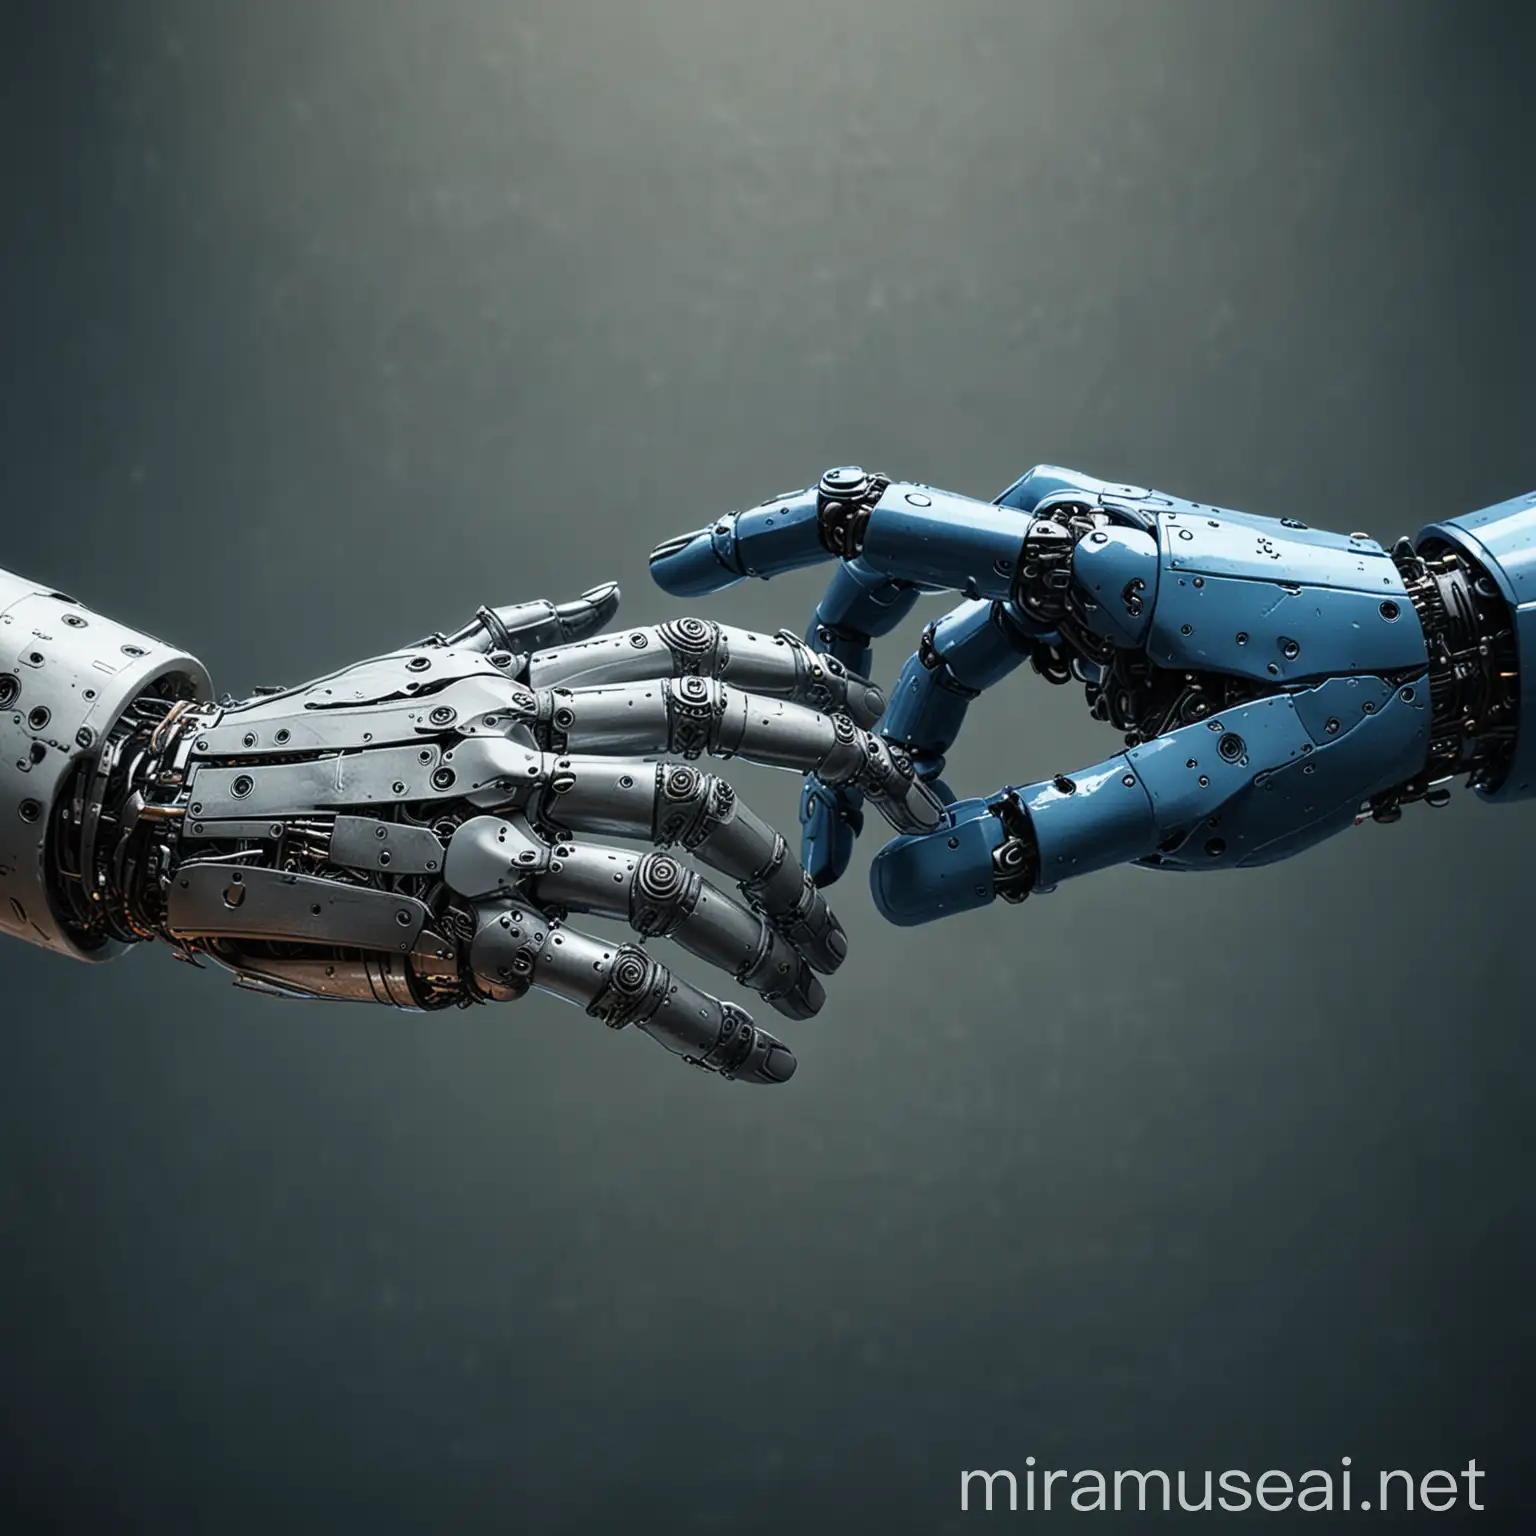 two robot hands touch with their index fingers, just like in L. Da Vinci's painting, God touches a human hand with his hand. Only the hands are visible, no other parts of the body are visible. The environment is somehow technical, robotic, and devoid of emotions. The colours are blue, dark blue silver and black